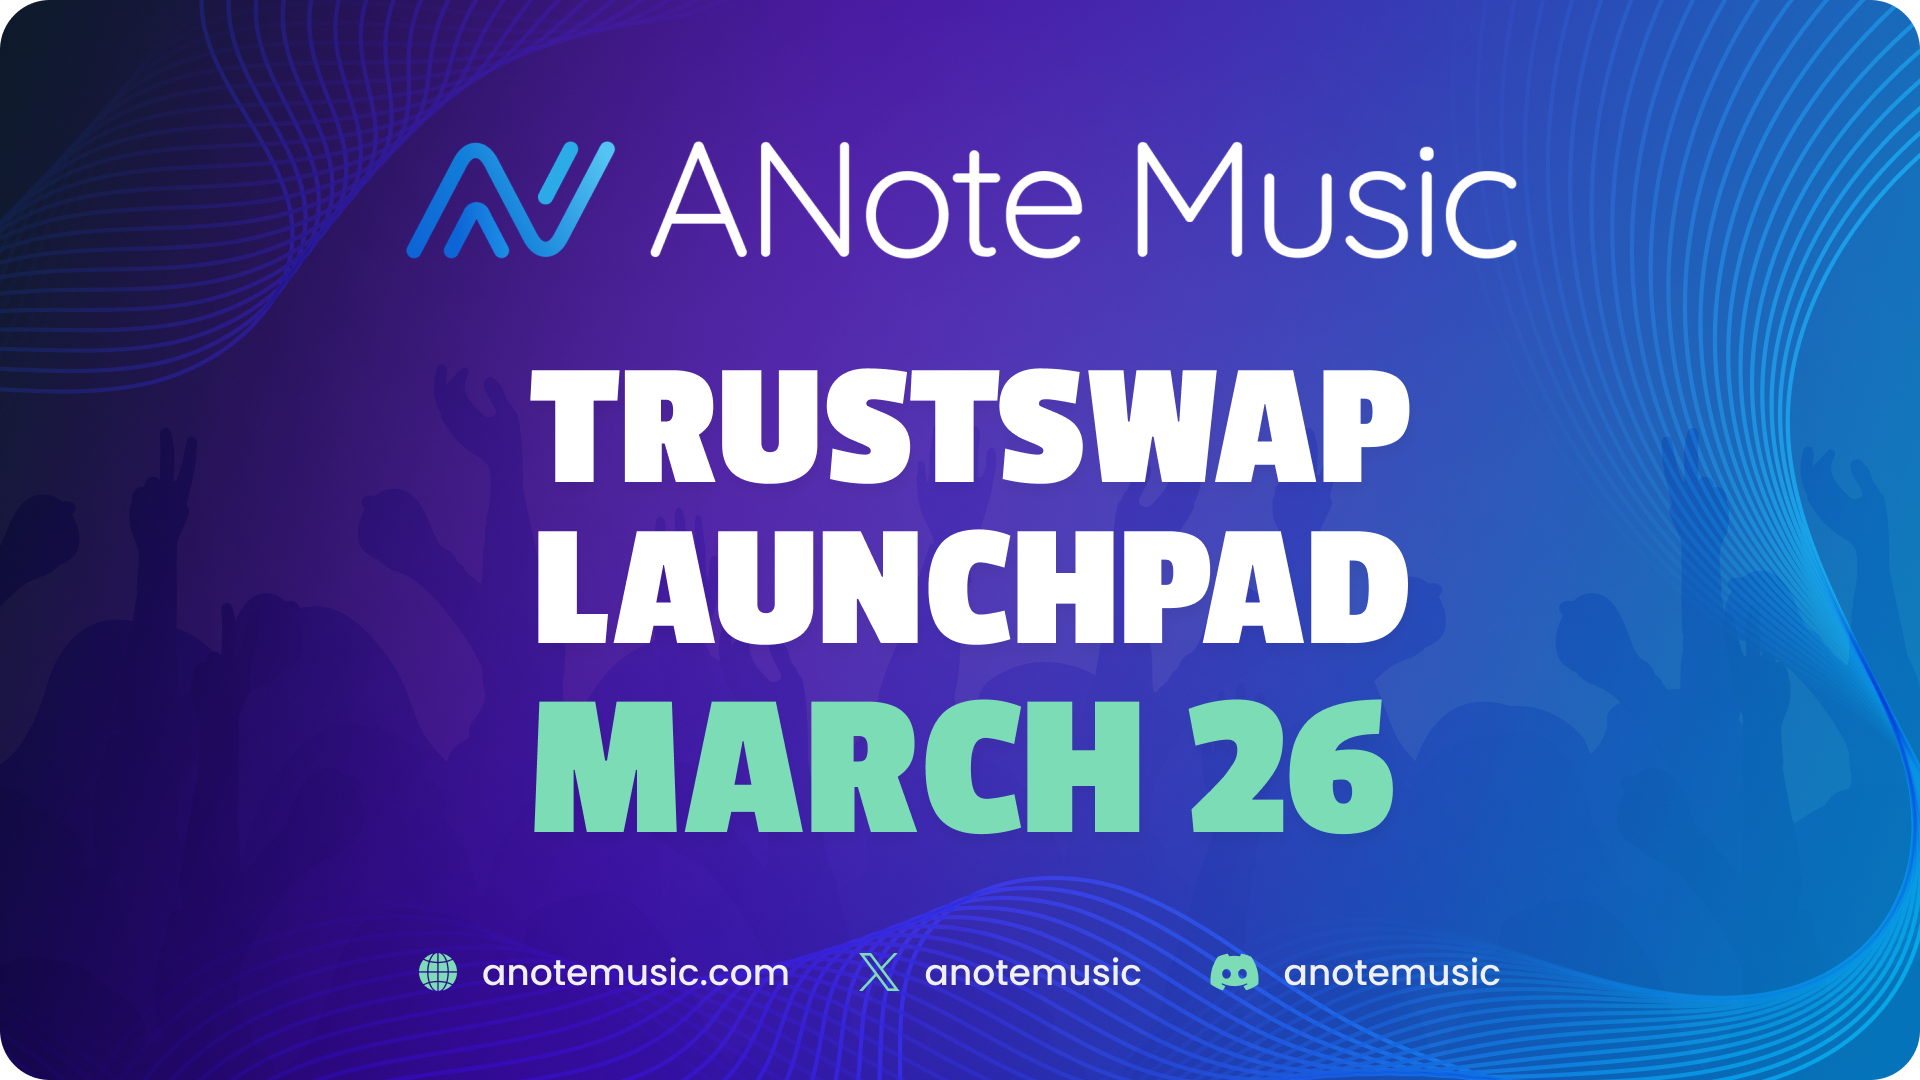 ANote Music Announces Public Round Token Offering March 26th on TrustSwap Launchpad